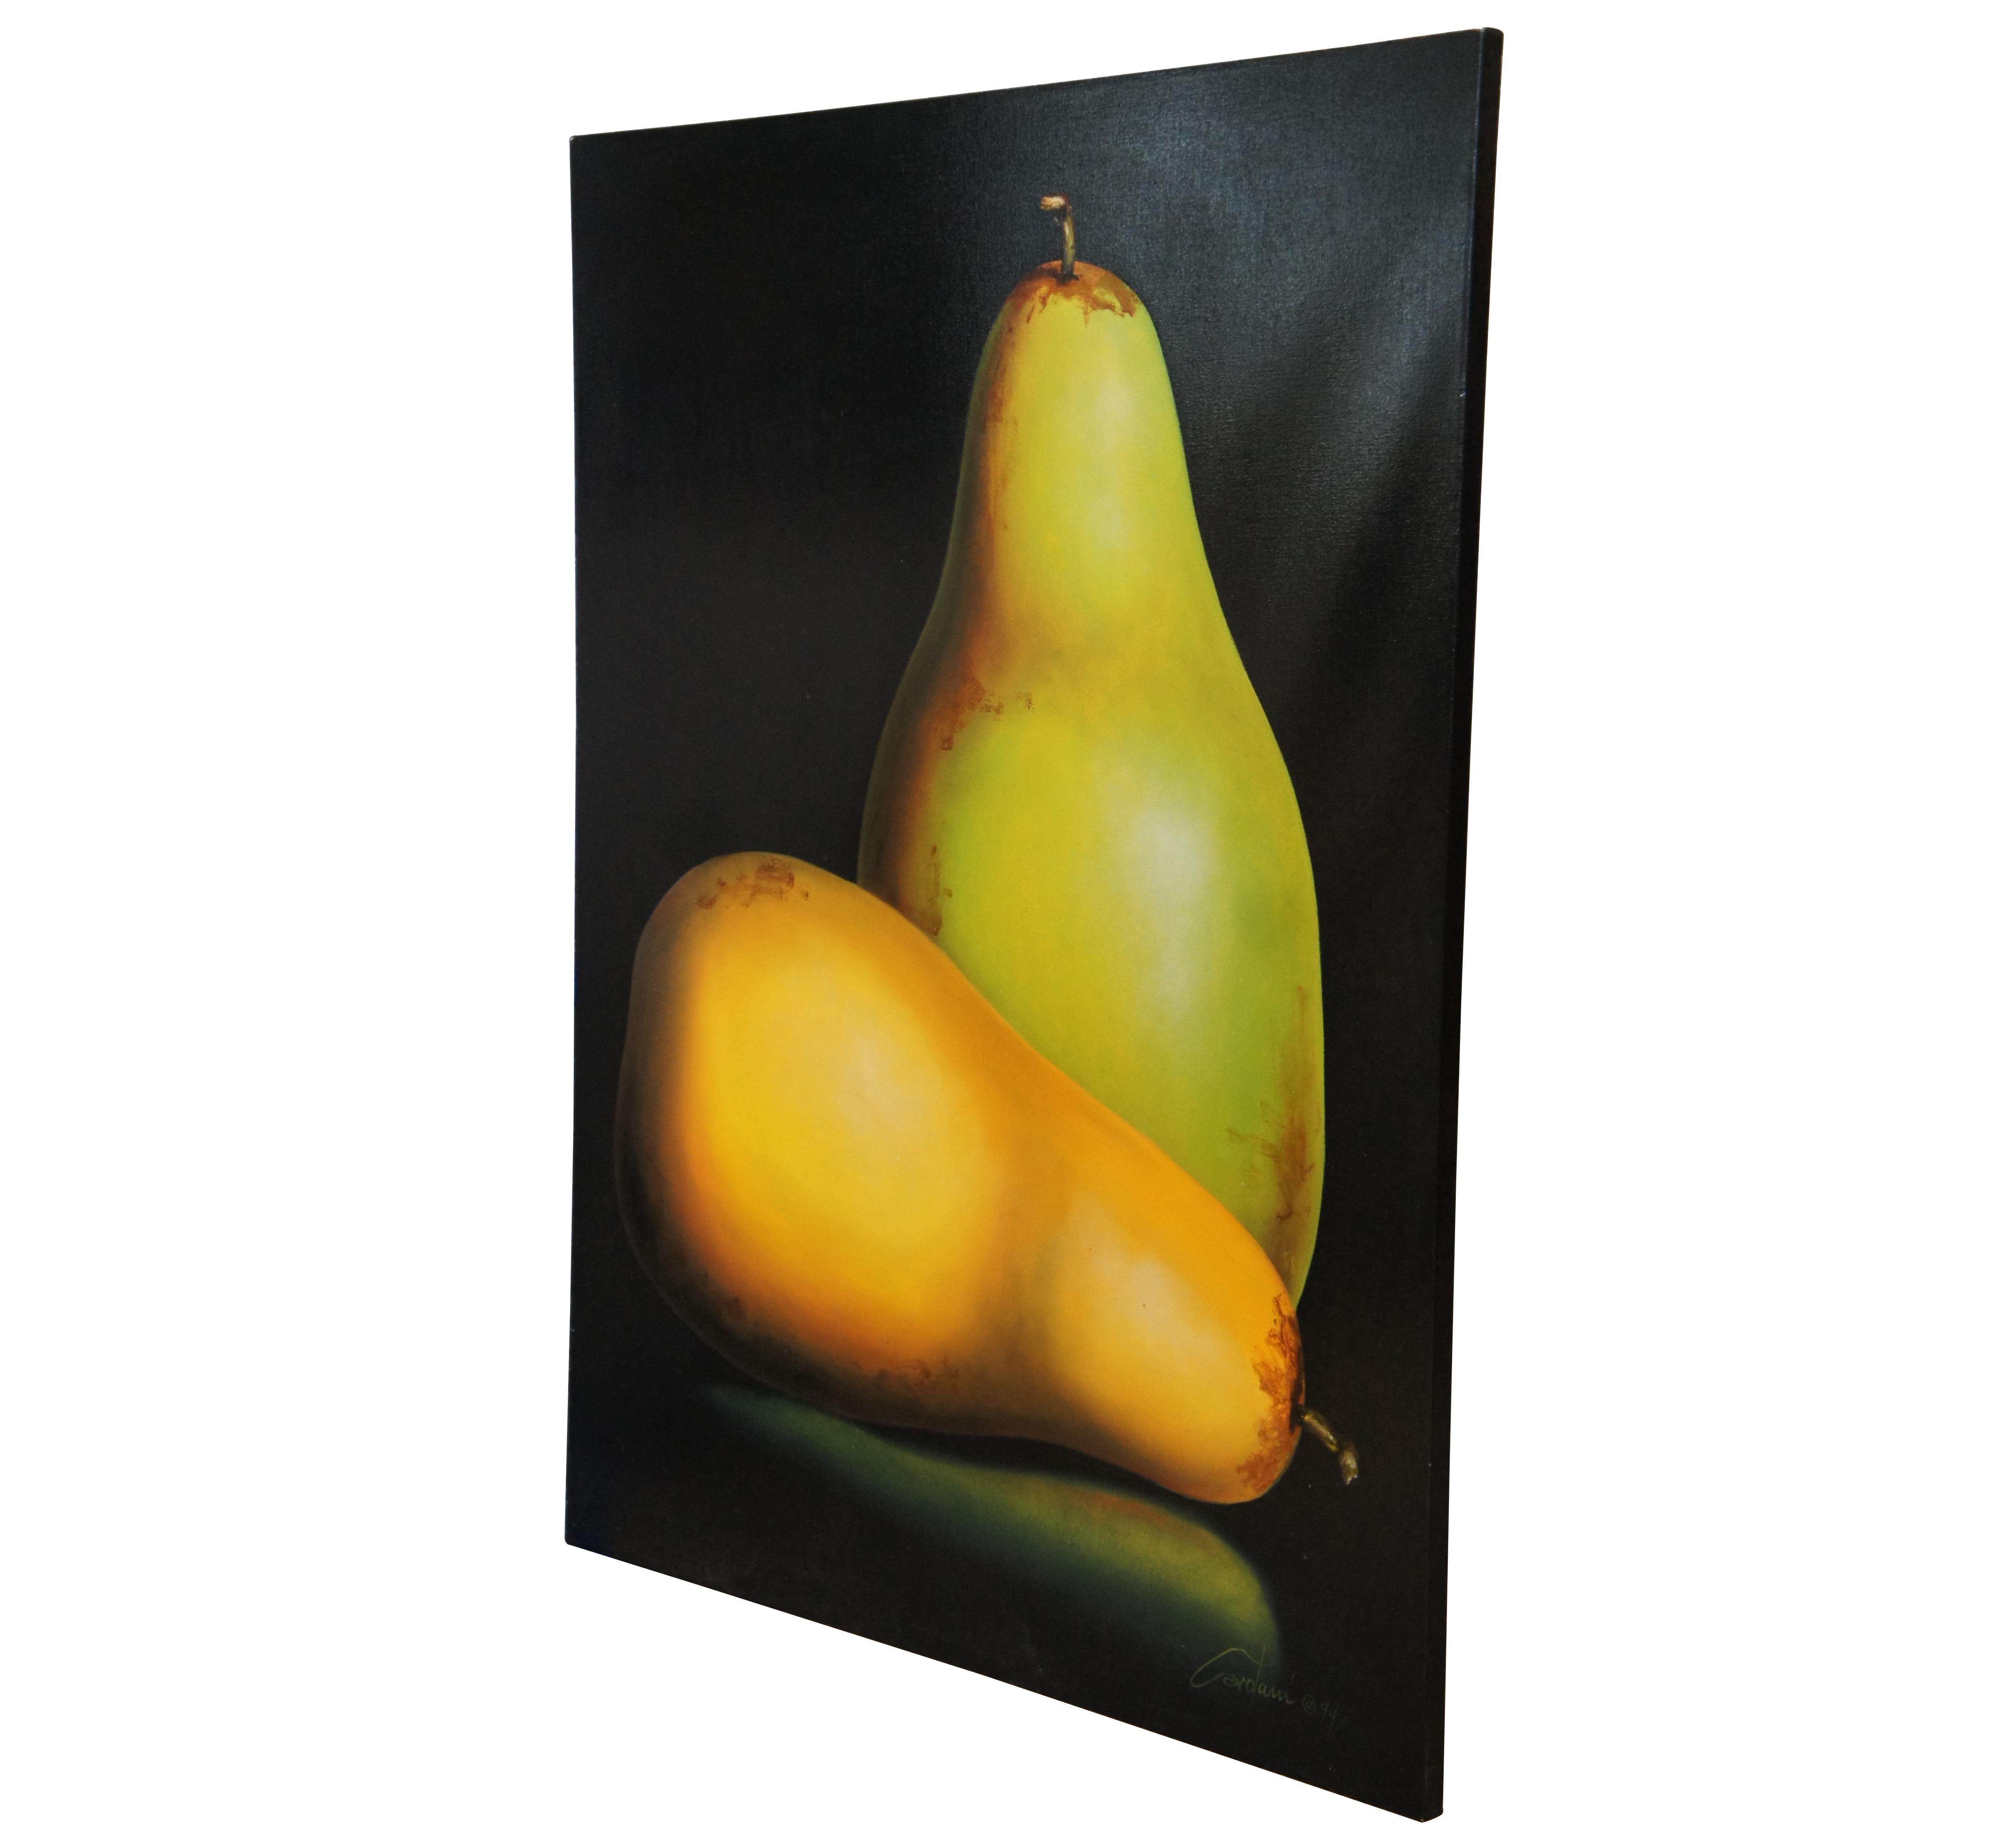 Vintage 1999 large scale oil on canvas painting of a pair of pears, done with intense chiaroscuro. Chiaroscuro in art, is the use of strong contrasts between light and dark, usually bold contrasts affecting a whole composition. Signed and dated in